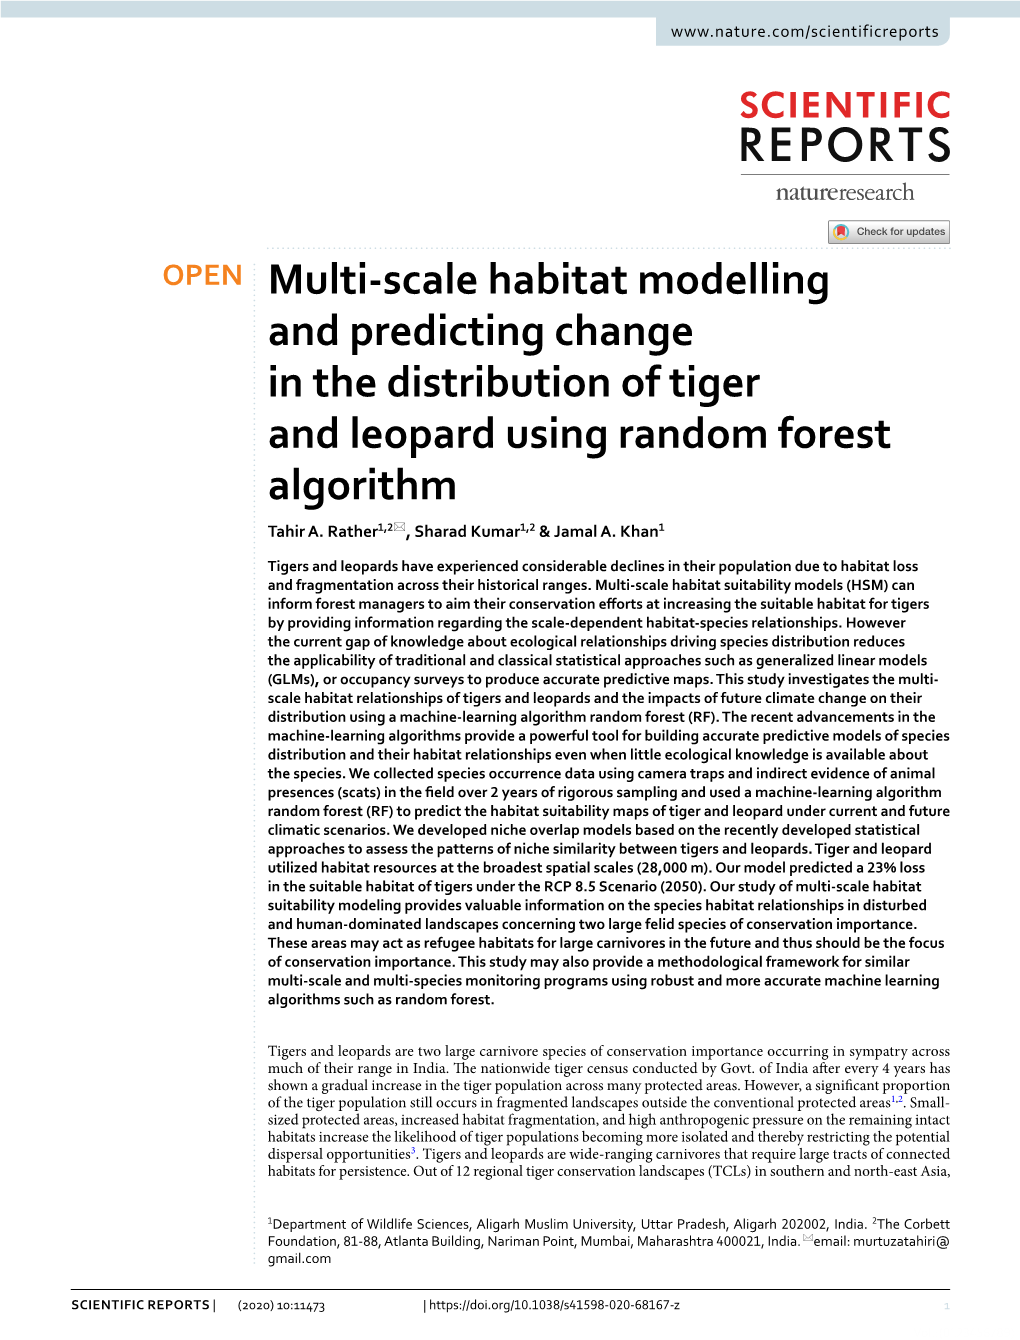 Multi-Scale Habitat Modelling and Predicting Change in the Distribution